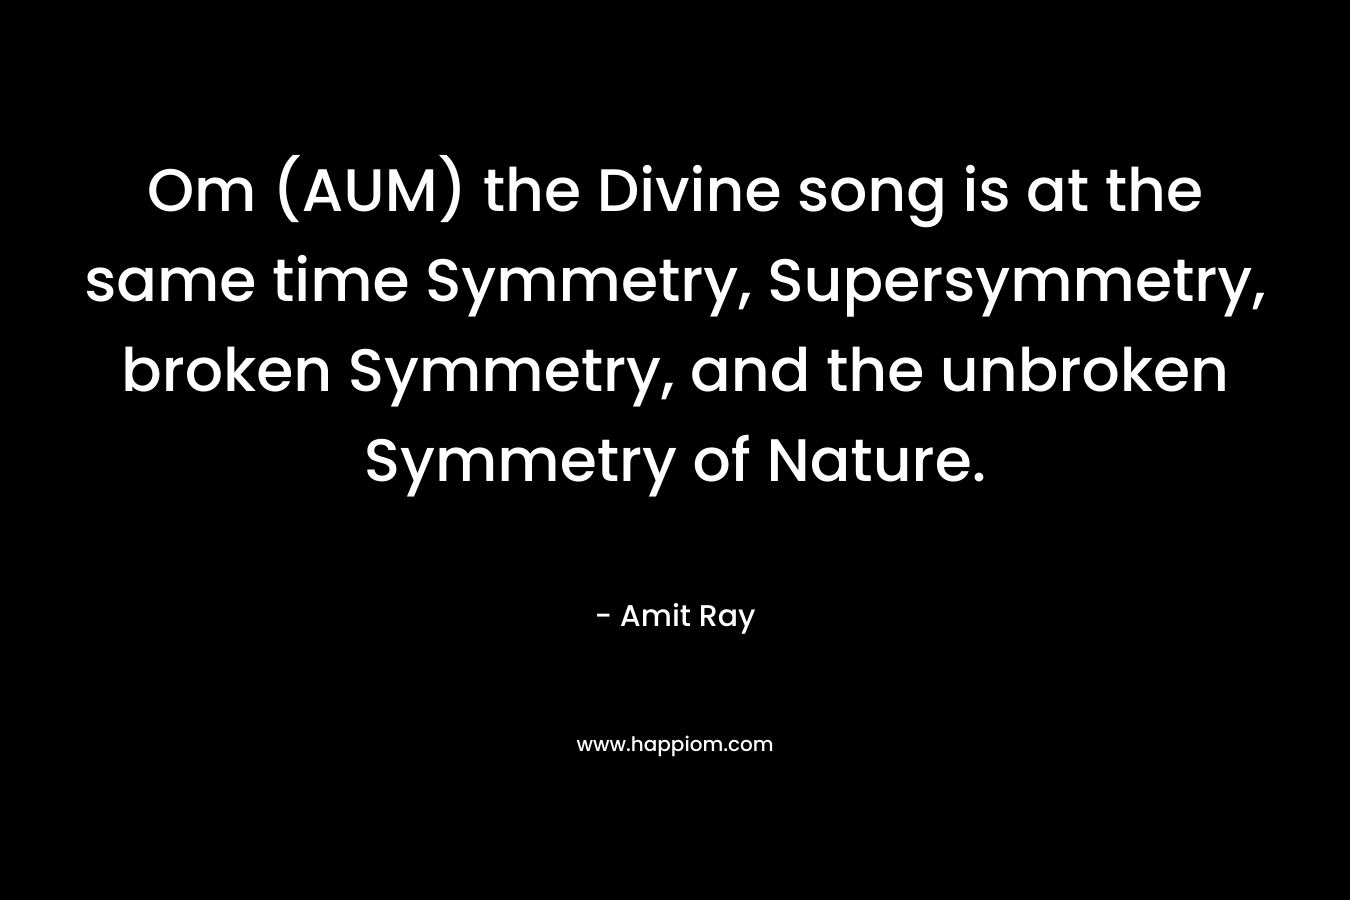 Om (AUM) the Divine song is at the same time Symmetry, Supersymmetry, broken Symmetry, and the unbroken Symmetry of Nature.